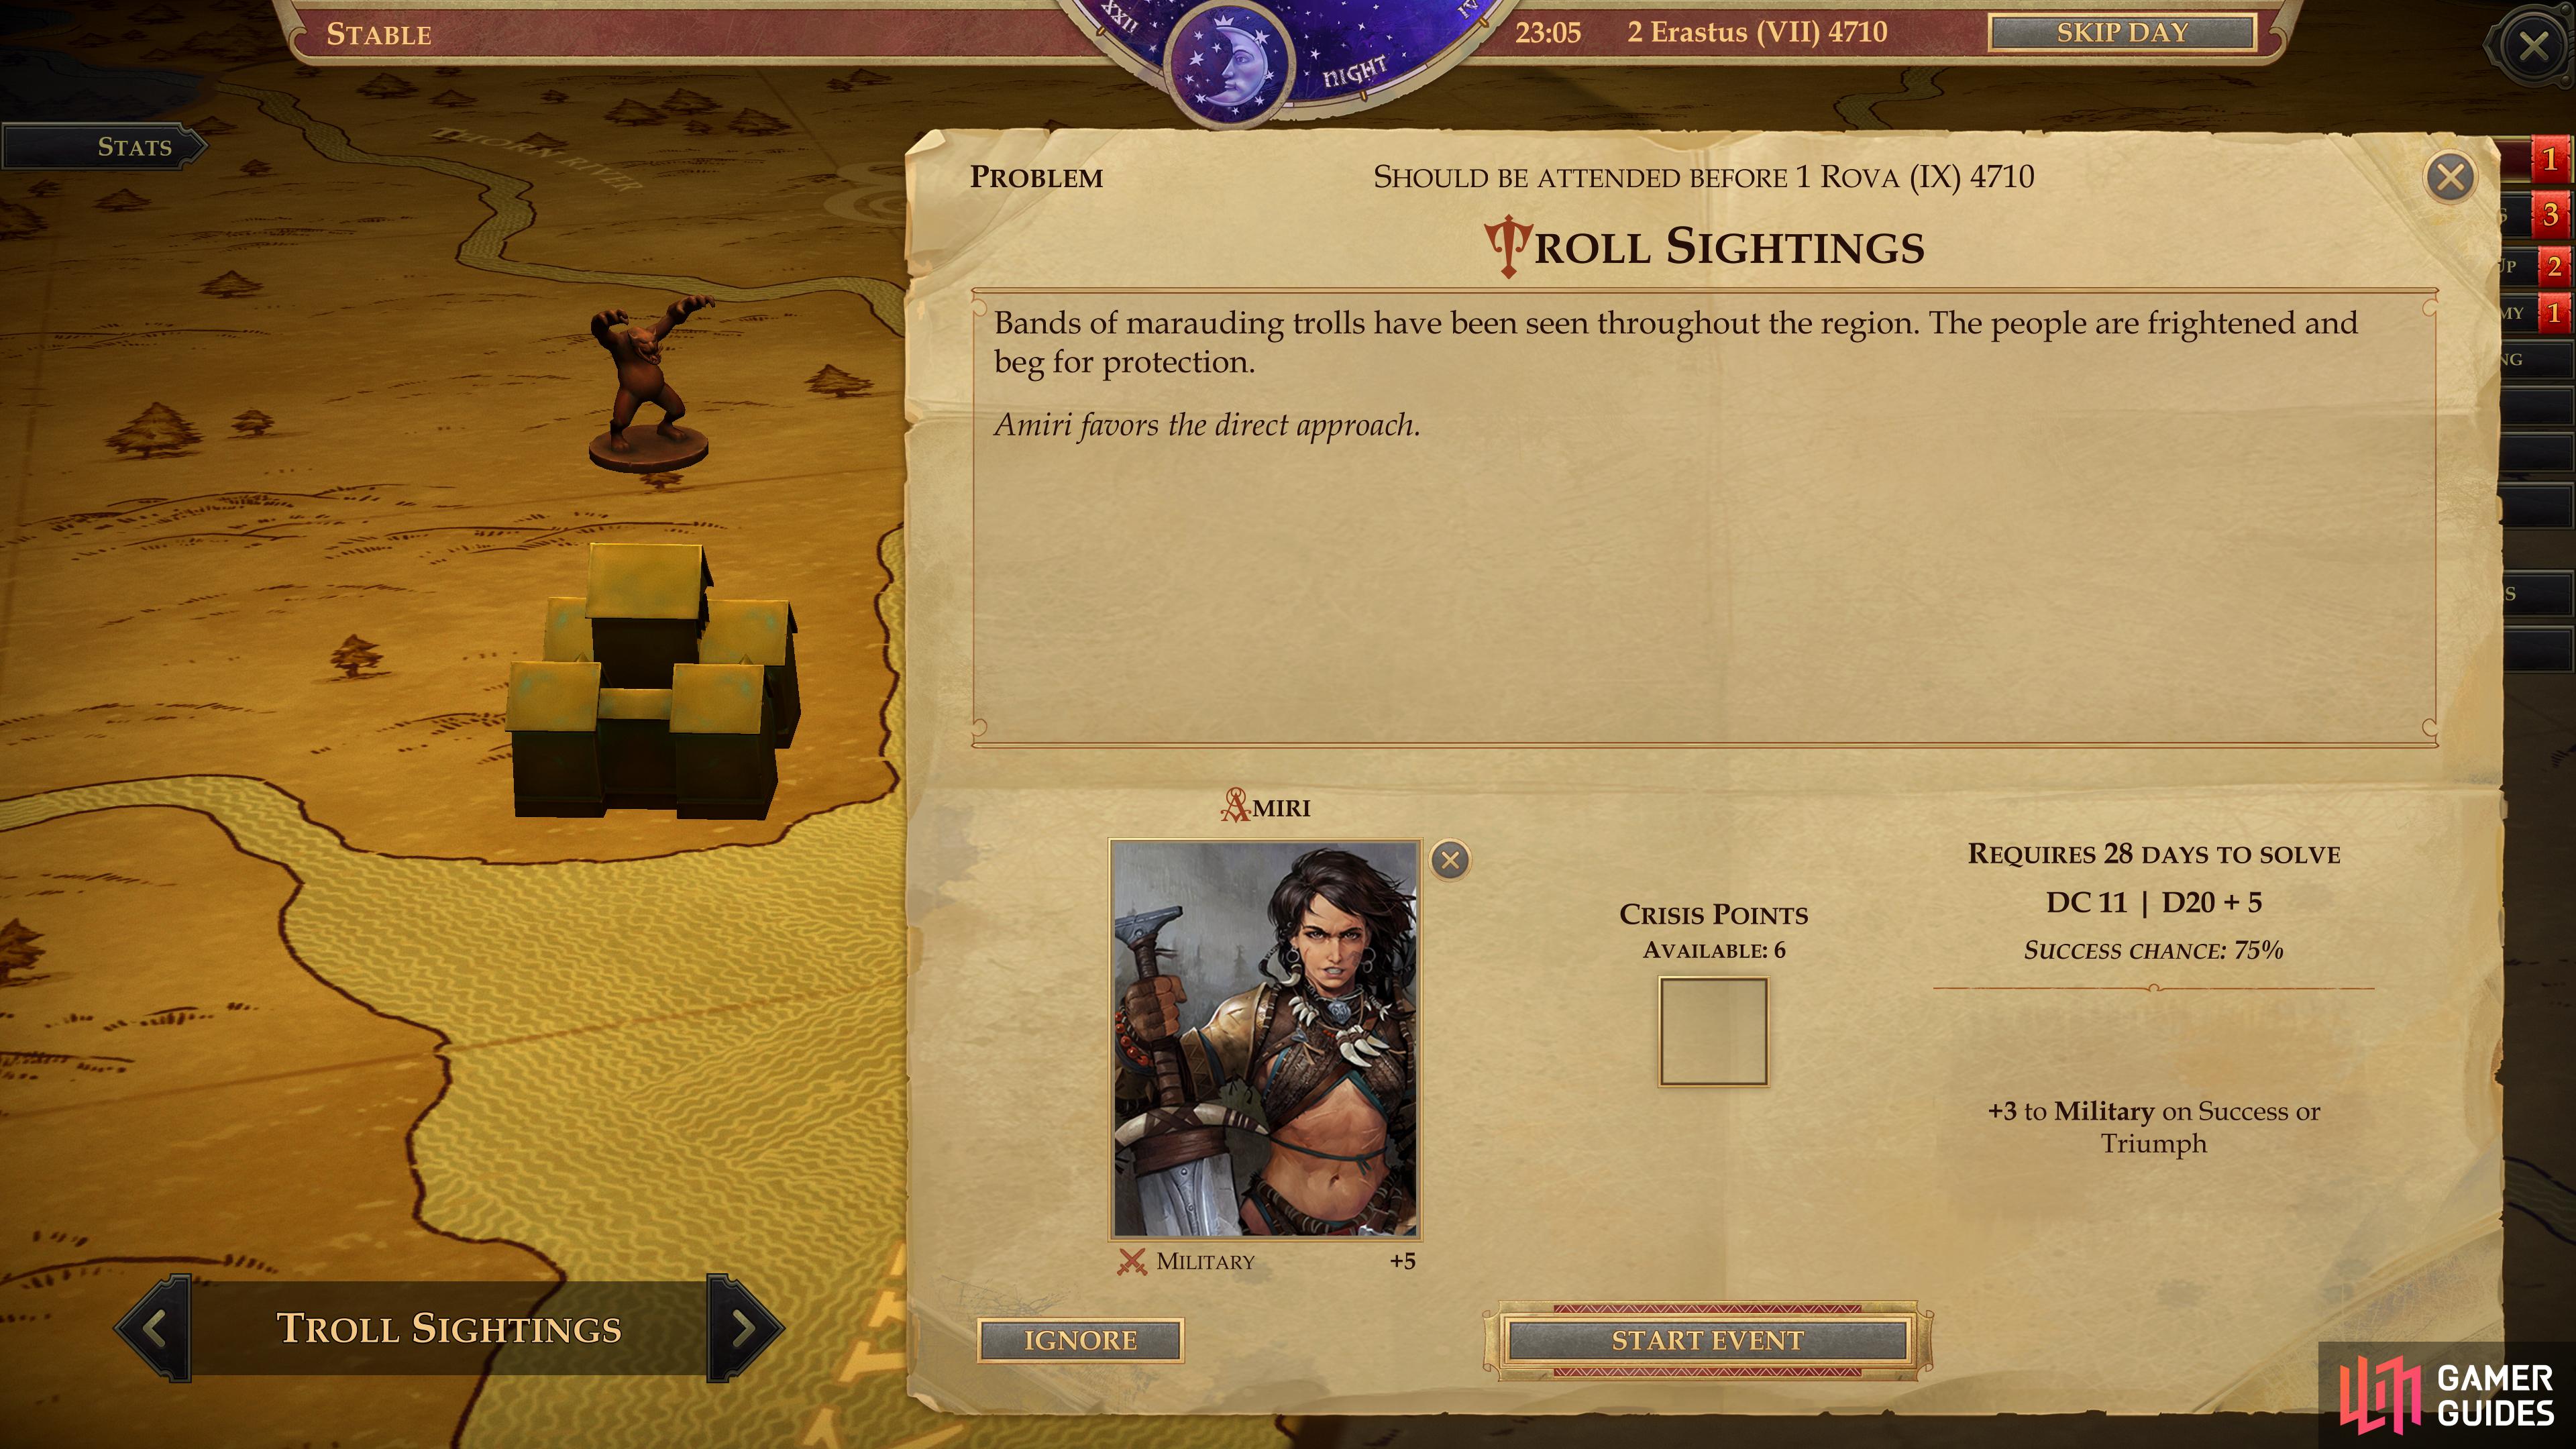 Have your General deal with the “Troll Sightings” event when it pops up.